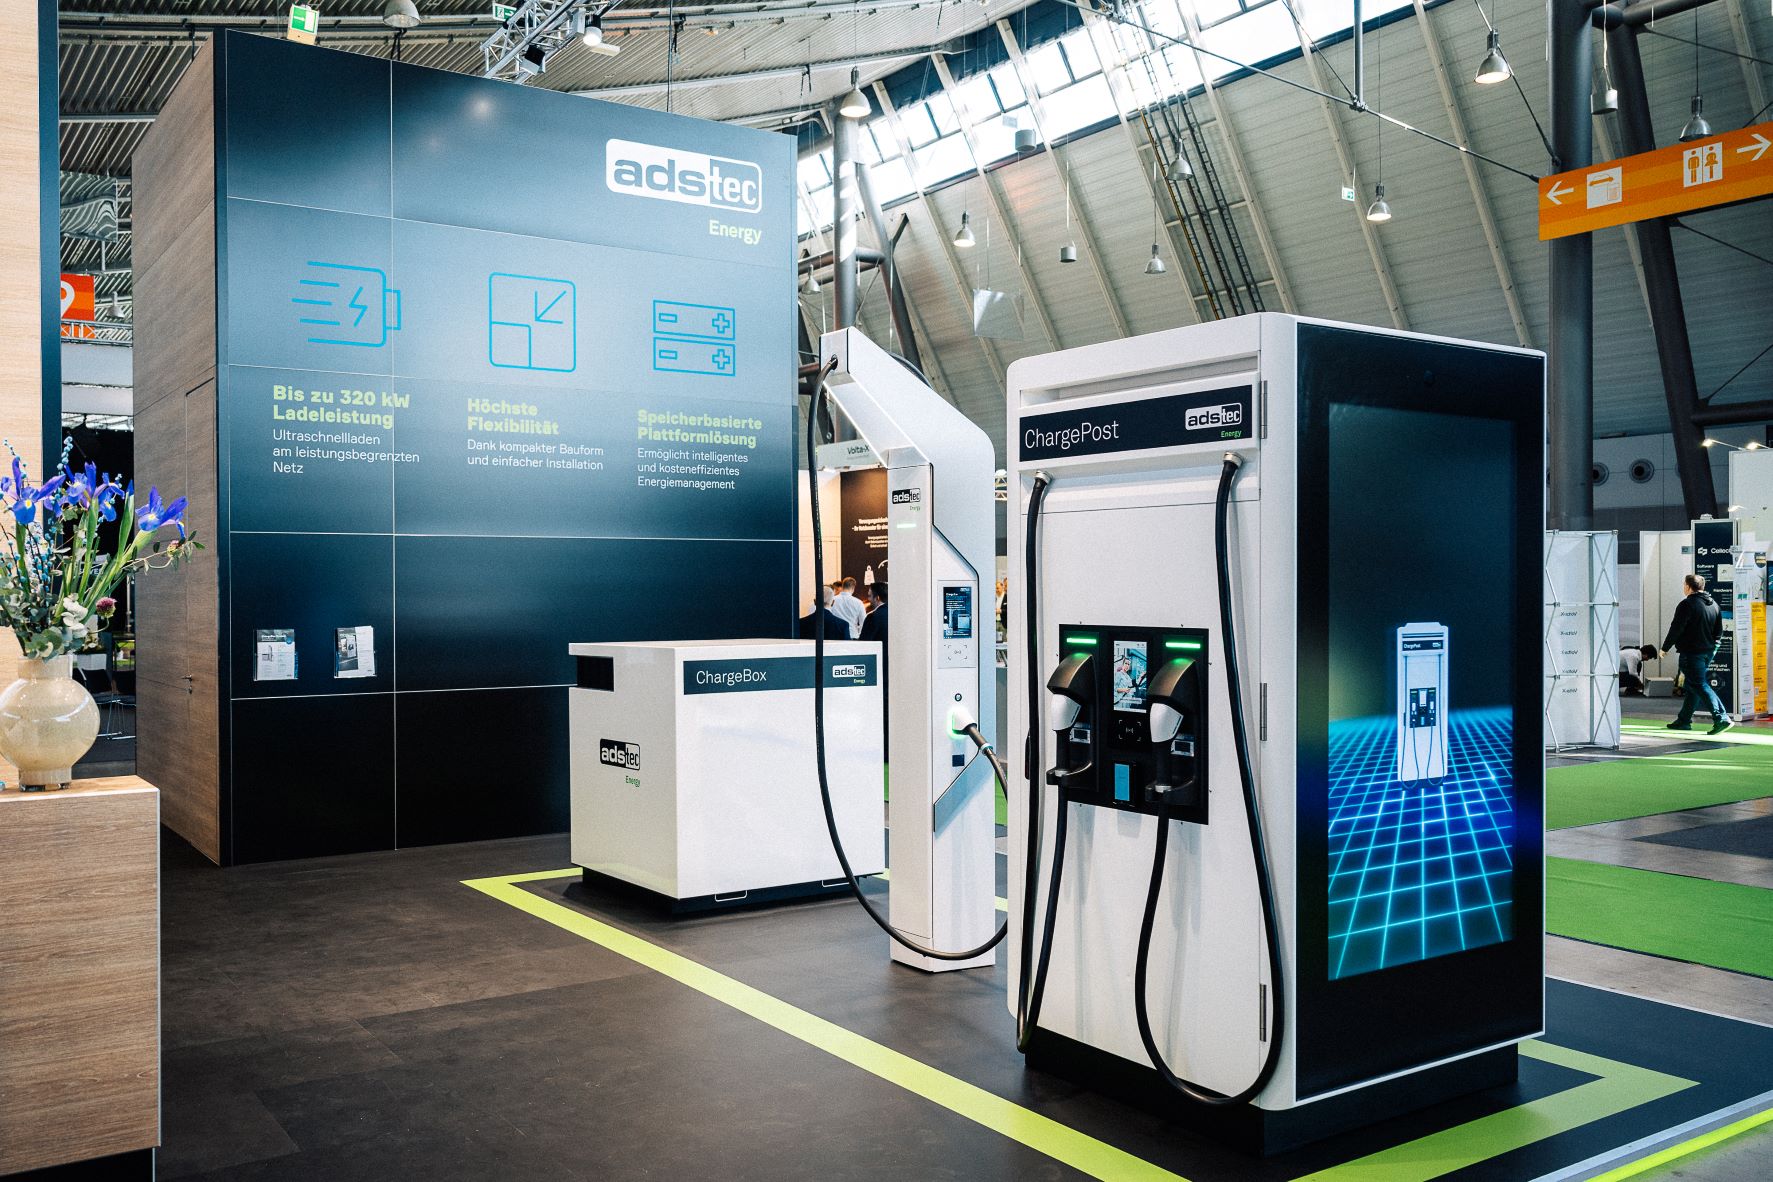 Ads-Tec presented its ChargePost, its ultra-fast charging solution to the public for the first time at Volta-X